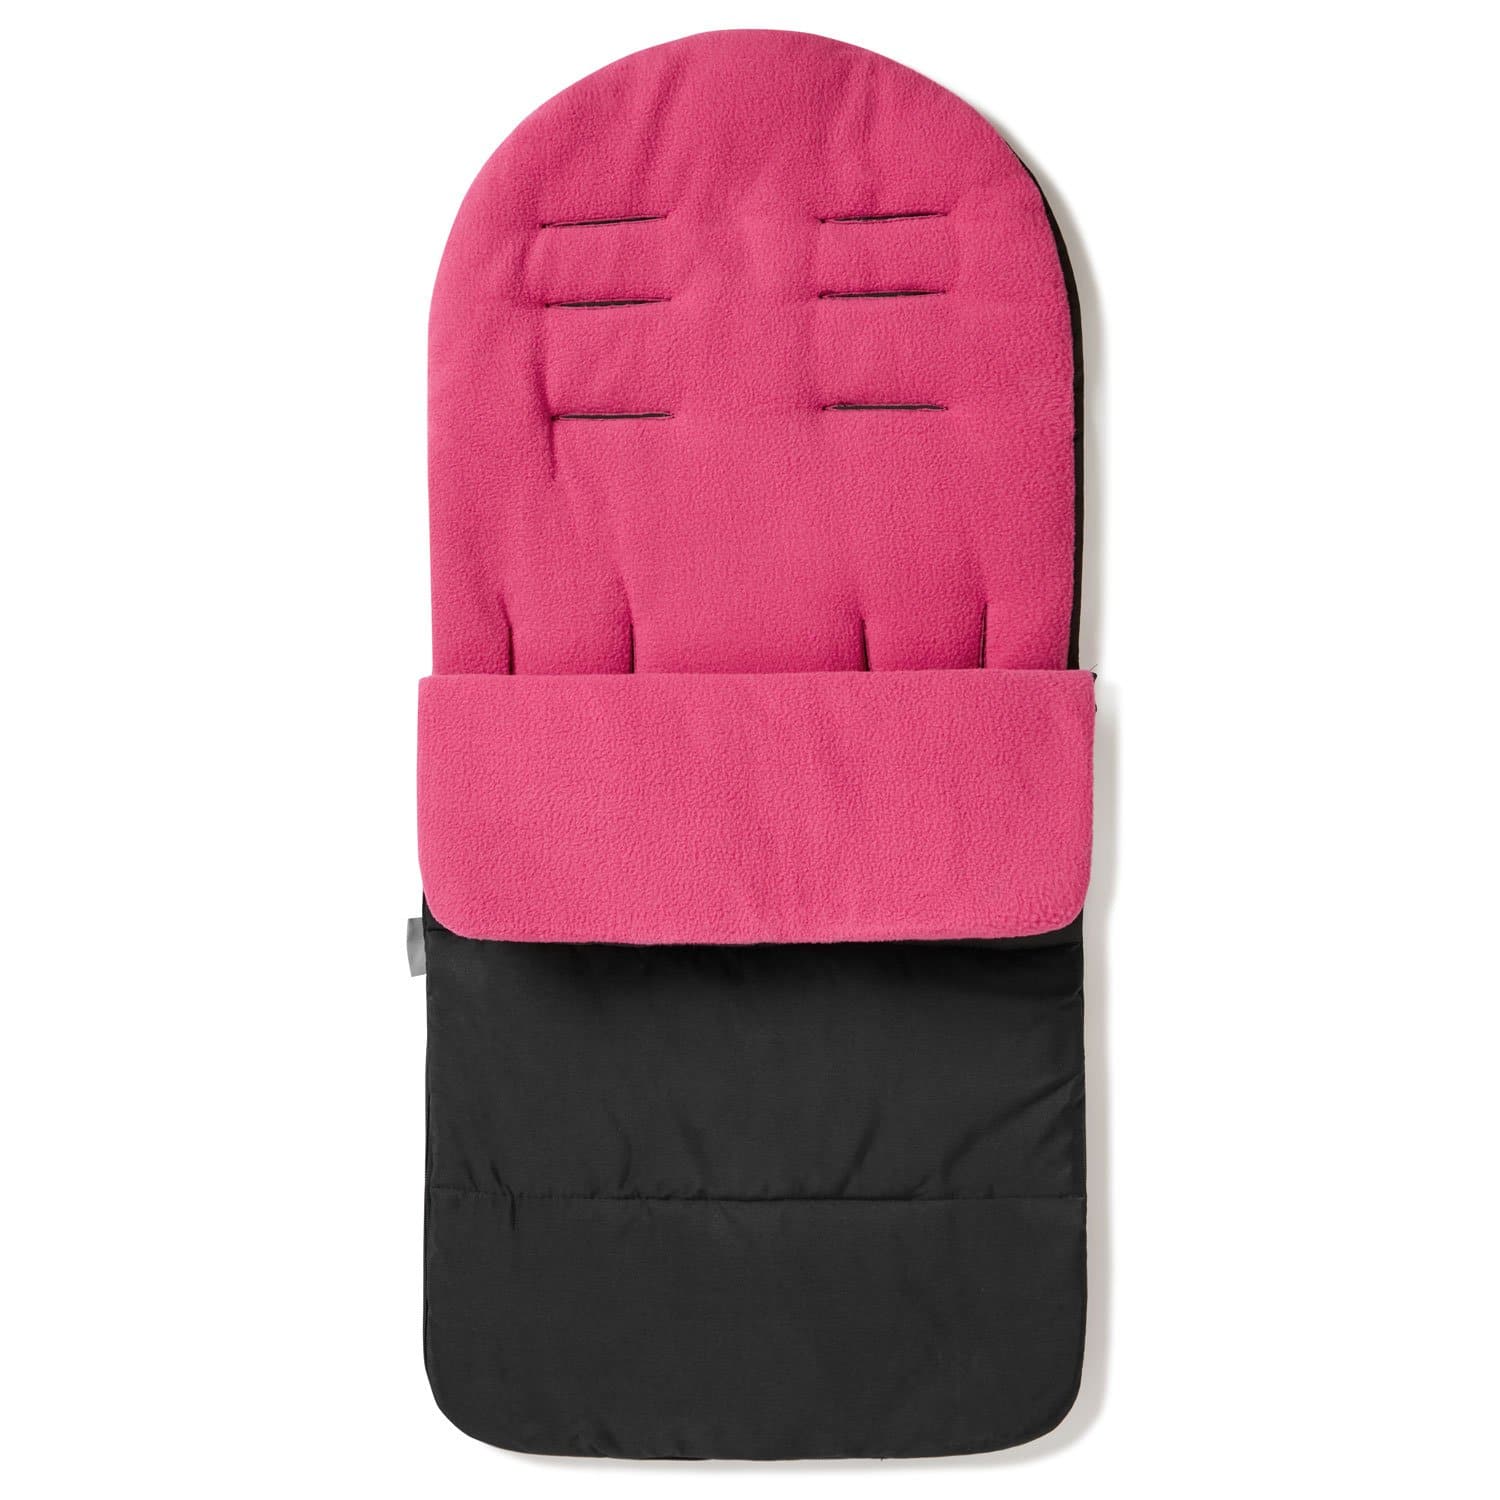 Premium Footmuff / Cosy Toes Compatible with Hartan - For Your Little One